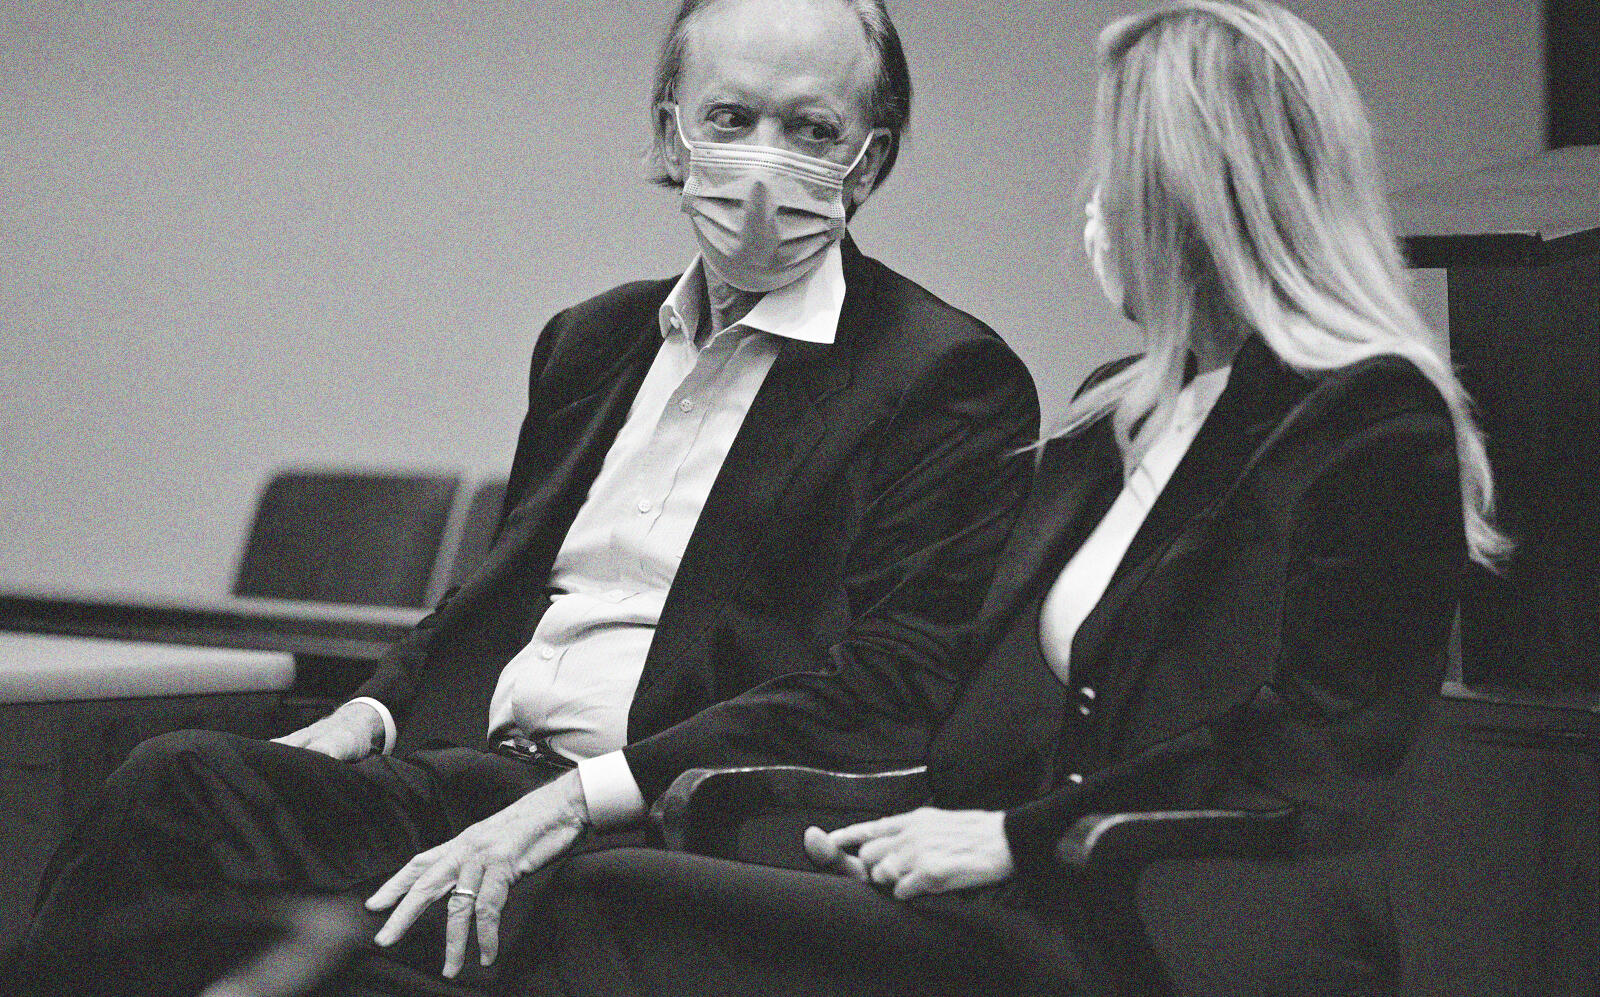 Bill and Amy Gross in Orange County Superior Court on October 1, 2021 (Getty)